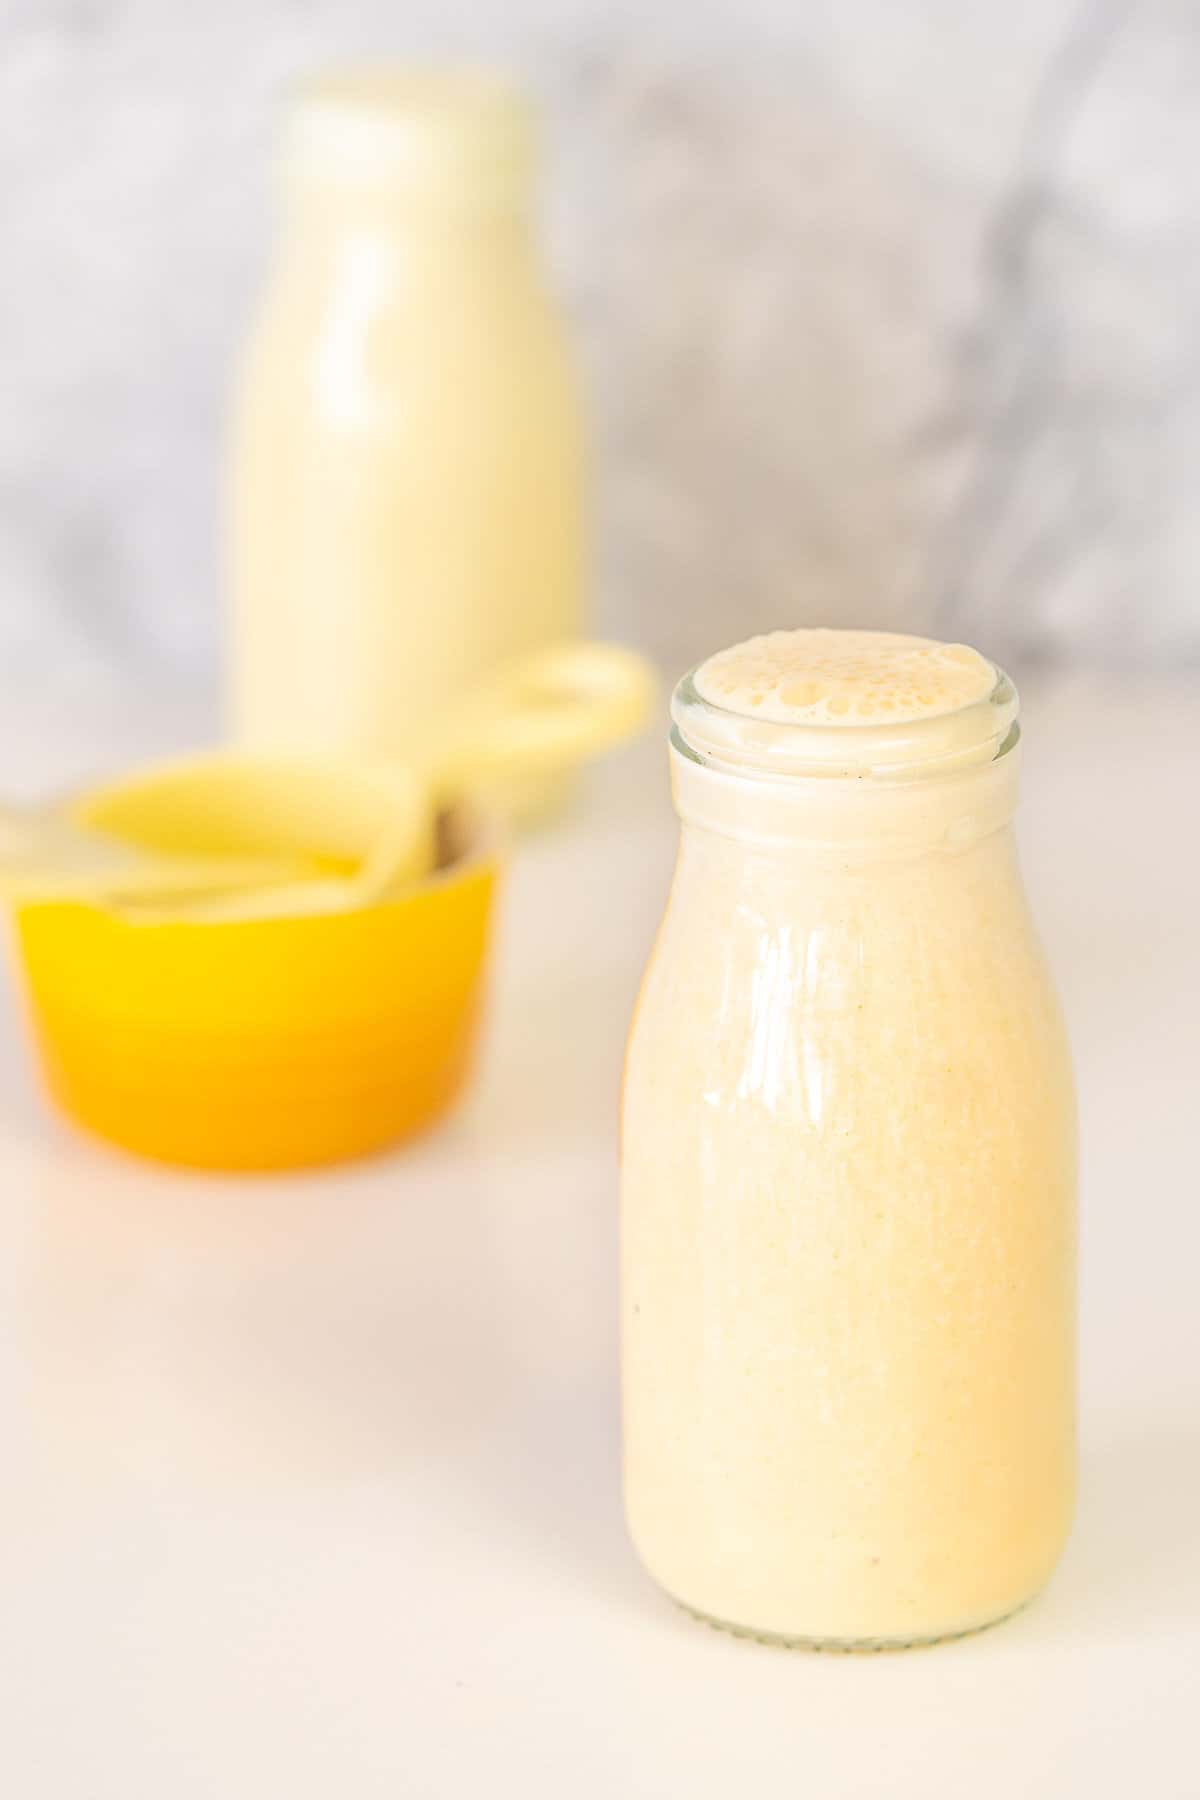 A small glass milk bottle filled with banana milk next to a yellow ramekin and yellow measuring cup. 